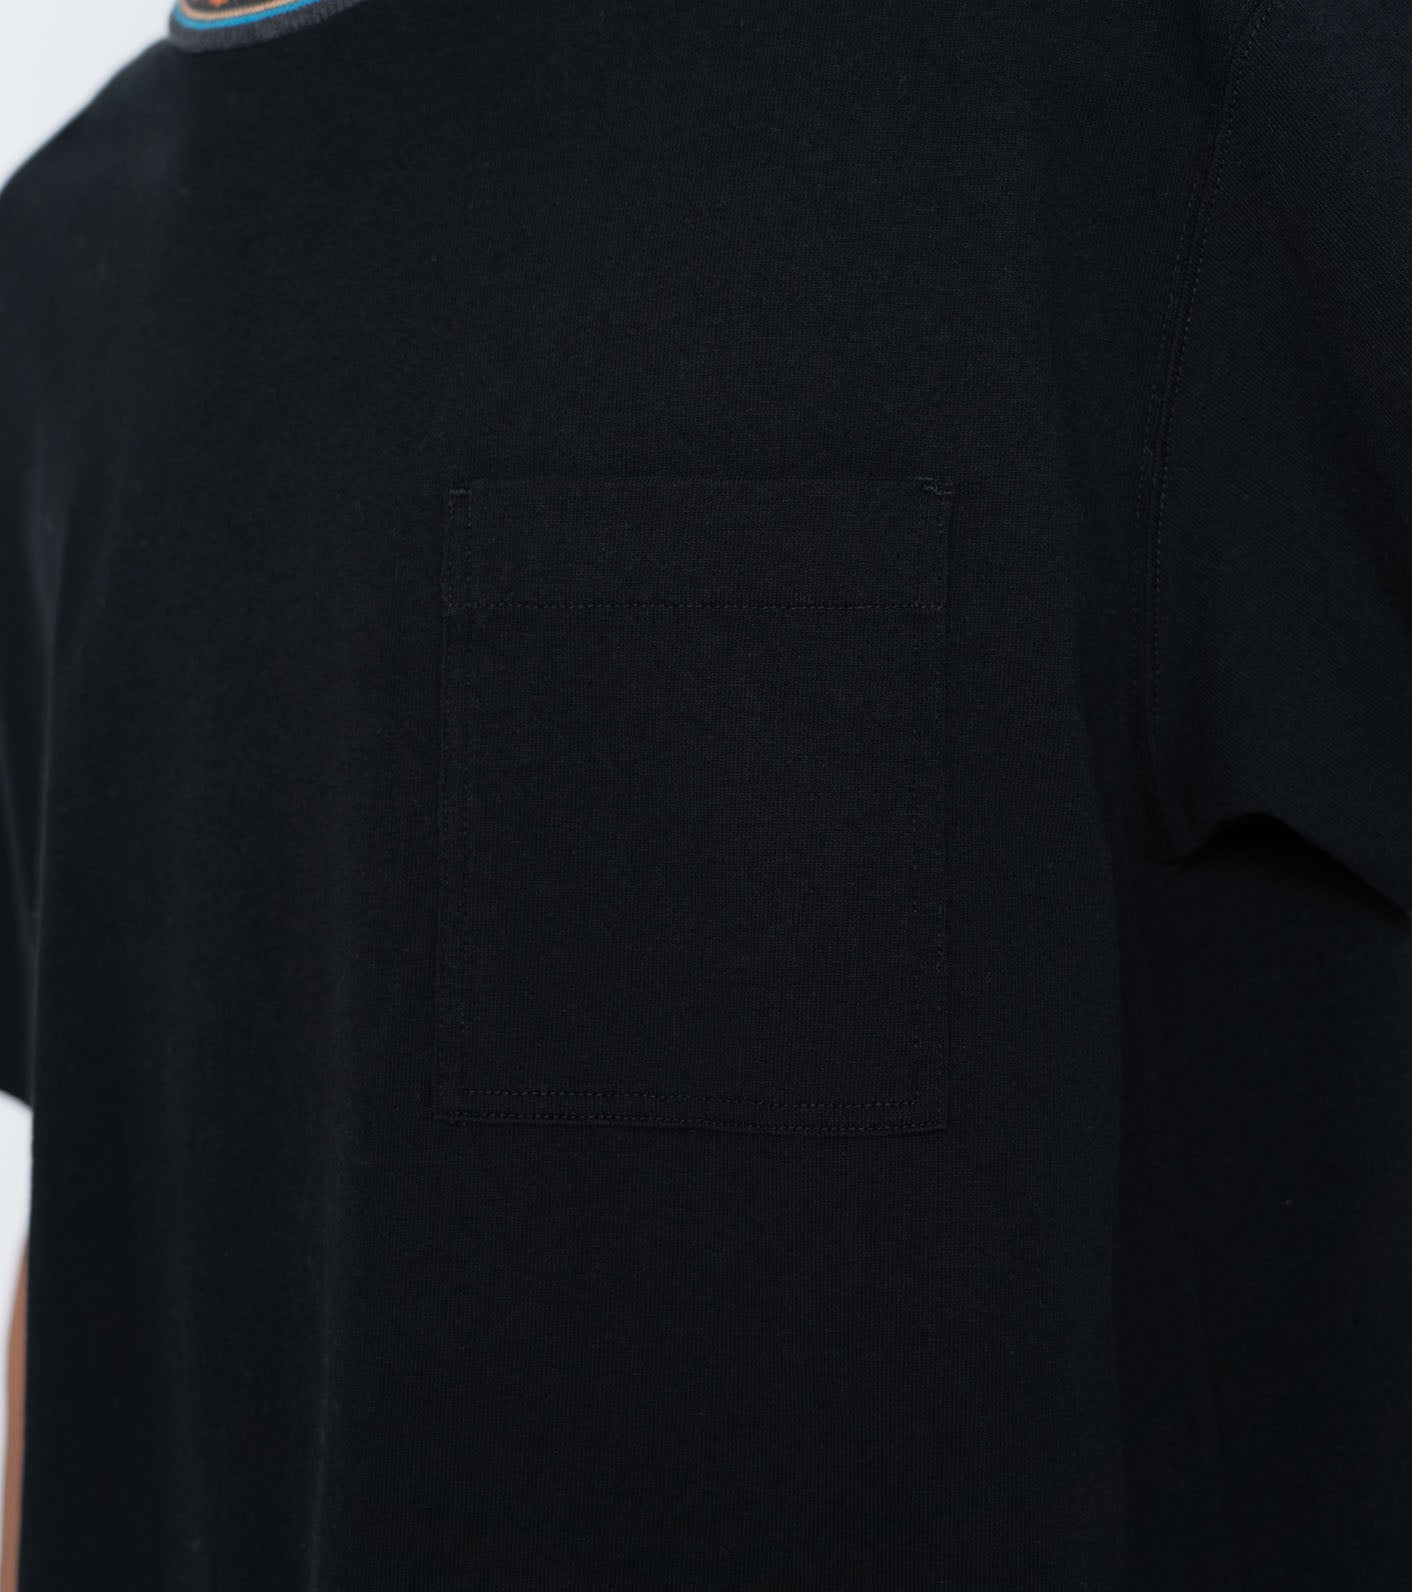 THE NORTH FACE PURPLE LABEL NP Jacquard Neck Field Tee